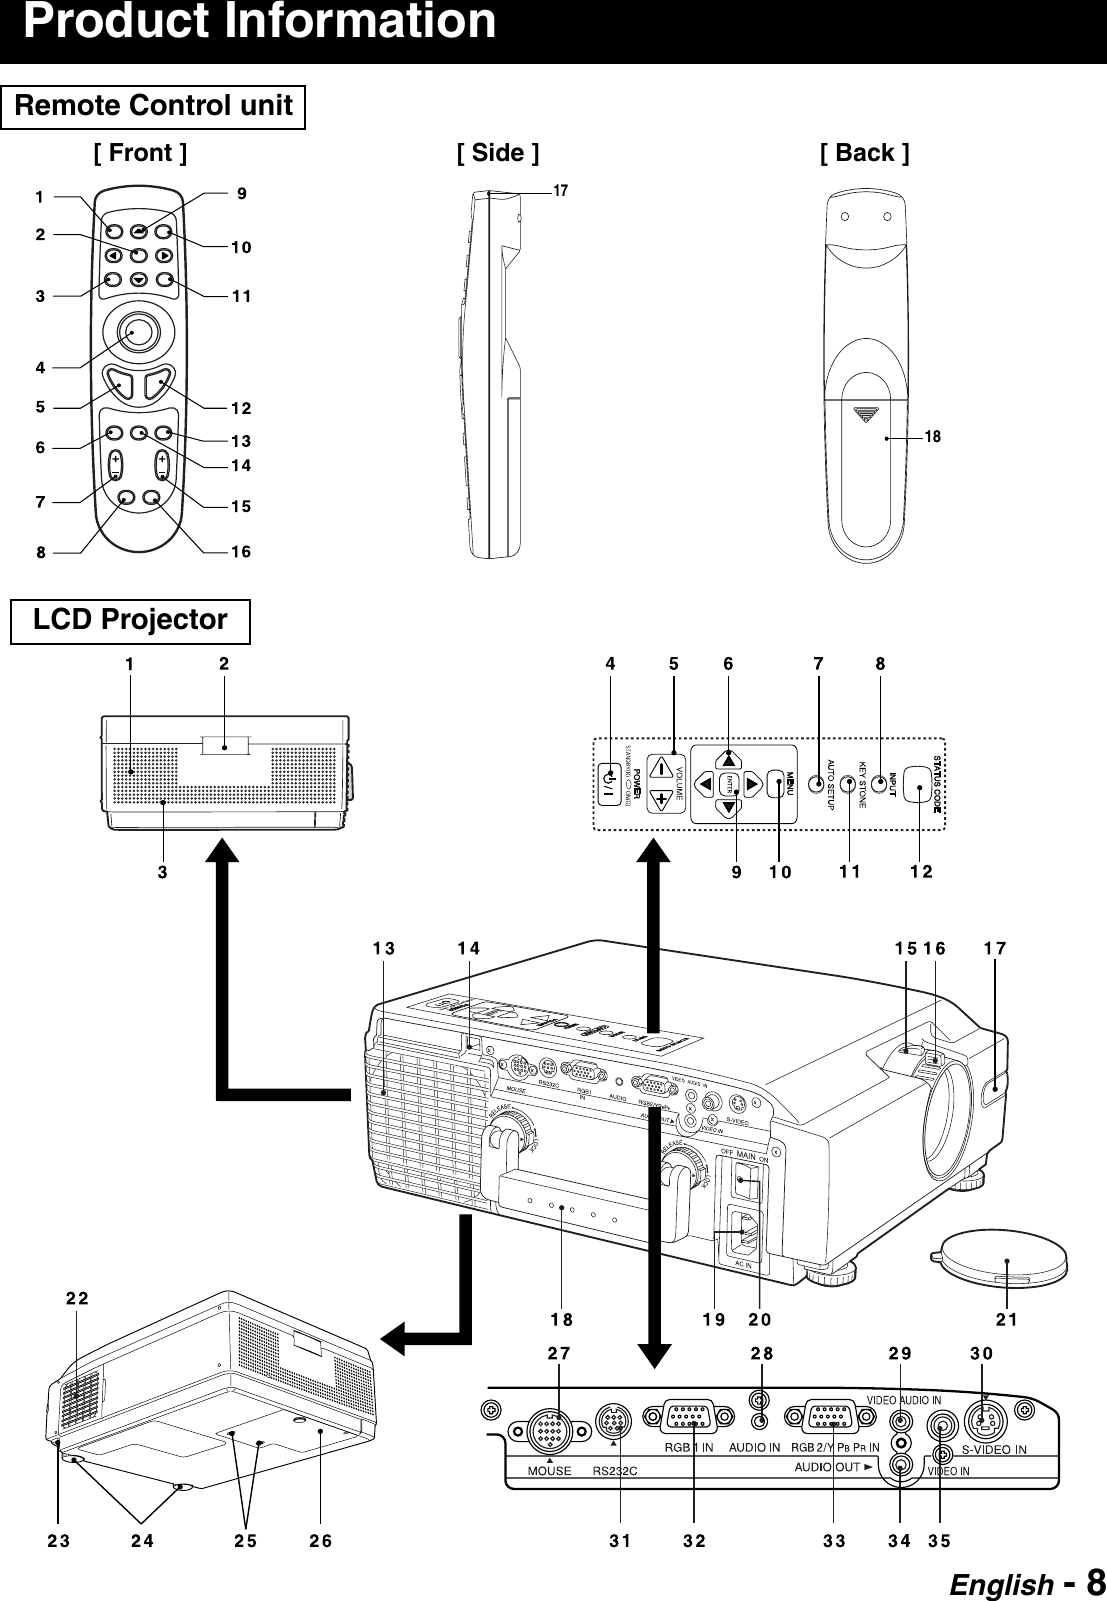 English - 8LCD Projector17Product Information[ Side ]Remote Control unit[ Front ]18[ Back ]